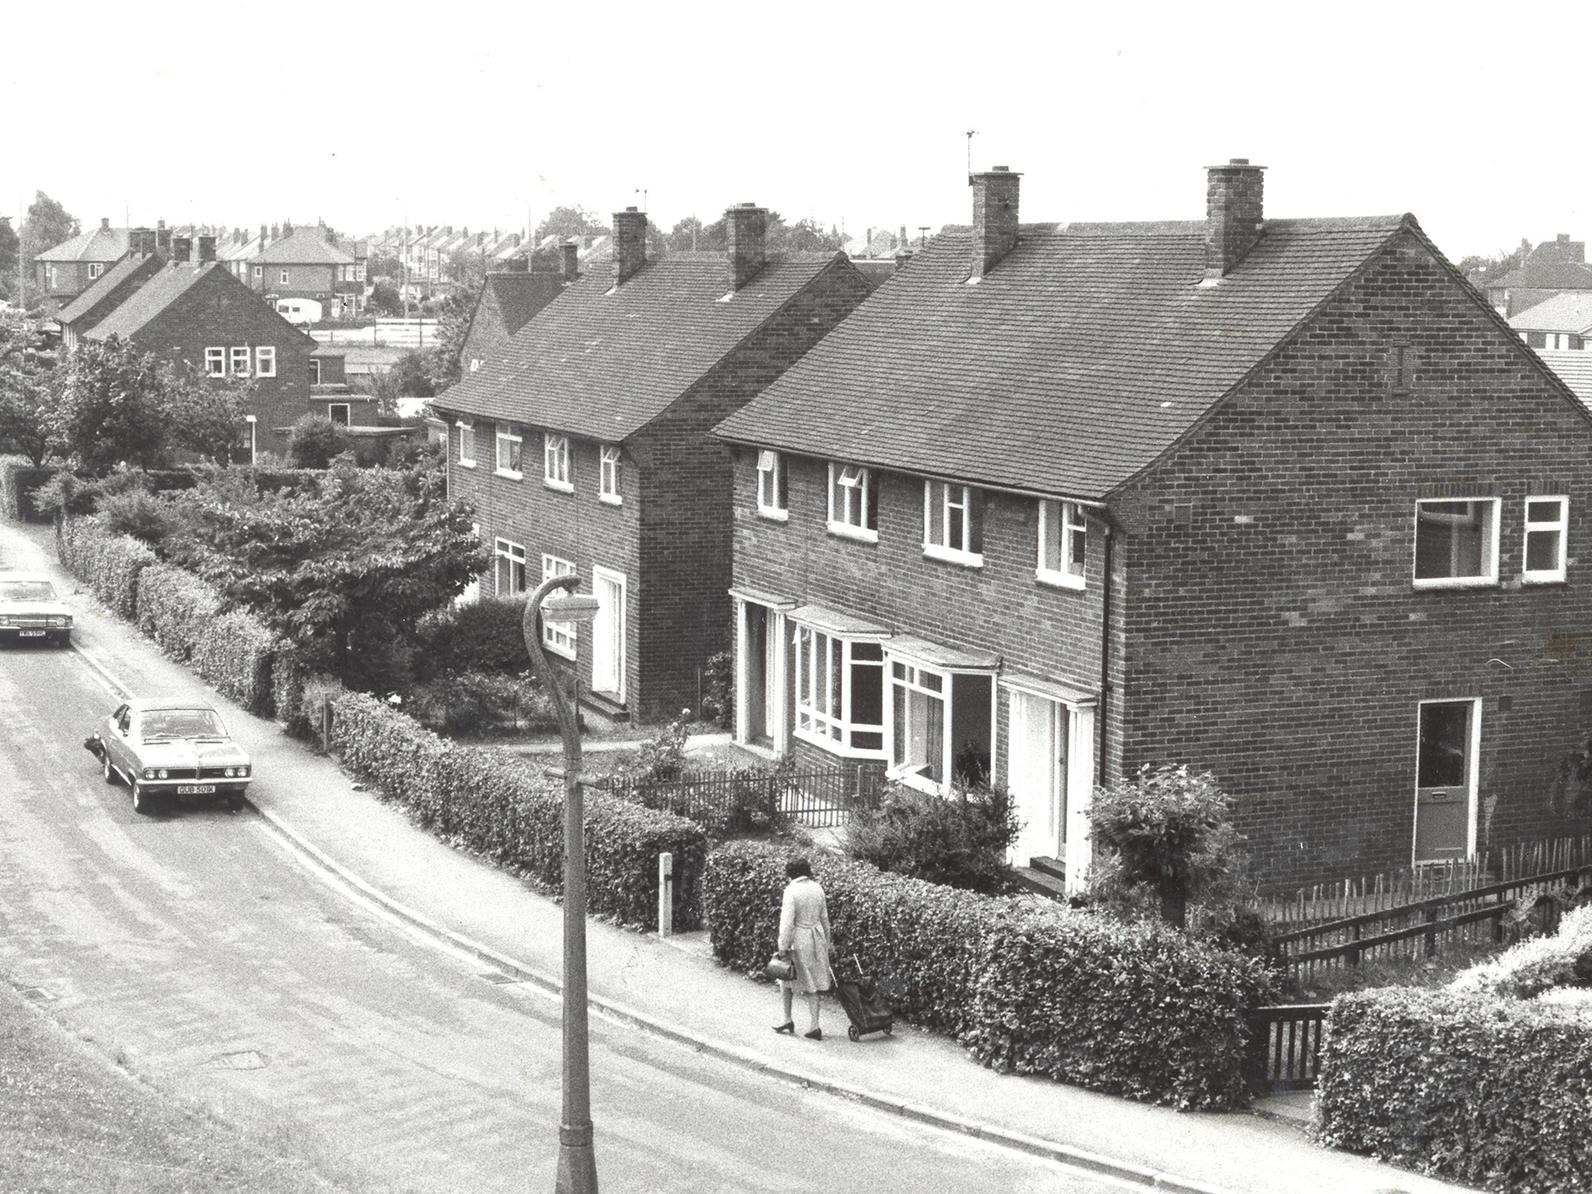 This is Stocks Road in Seacroft at the end of the 1970s.